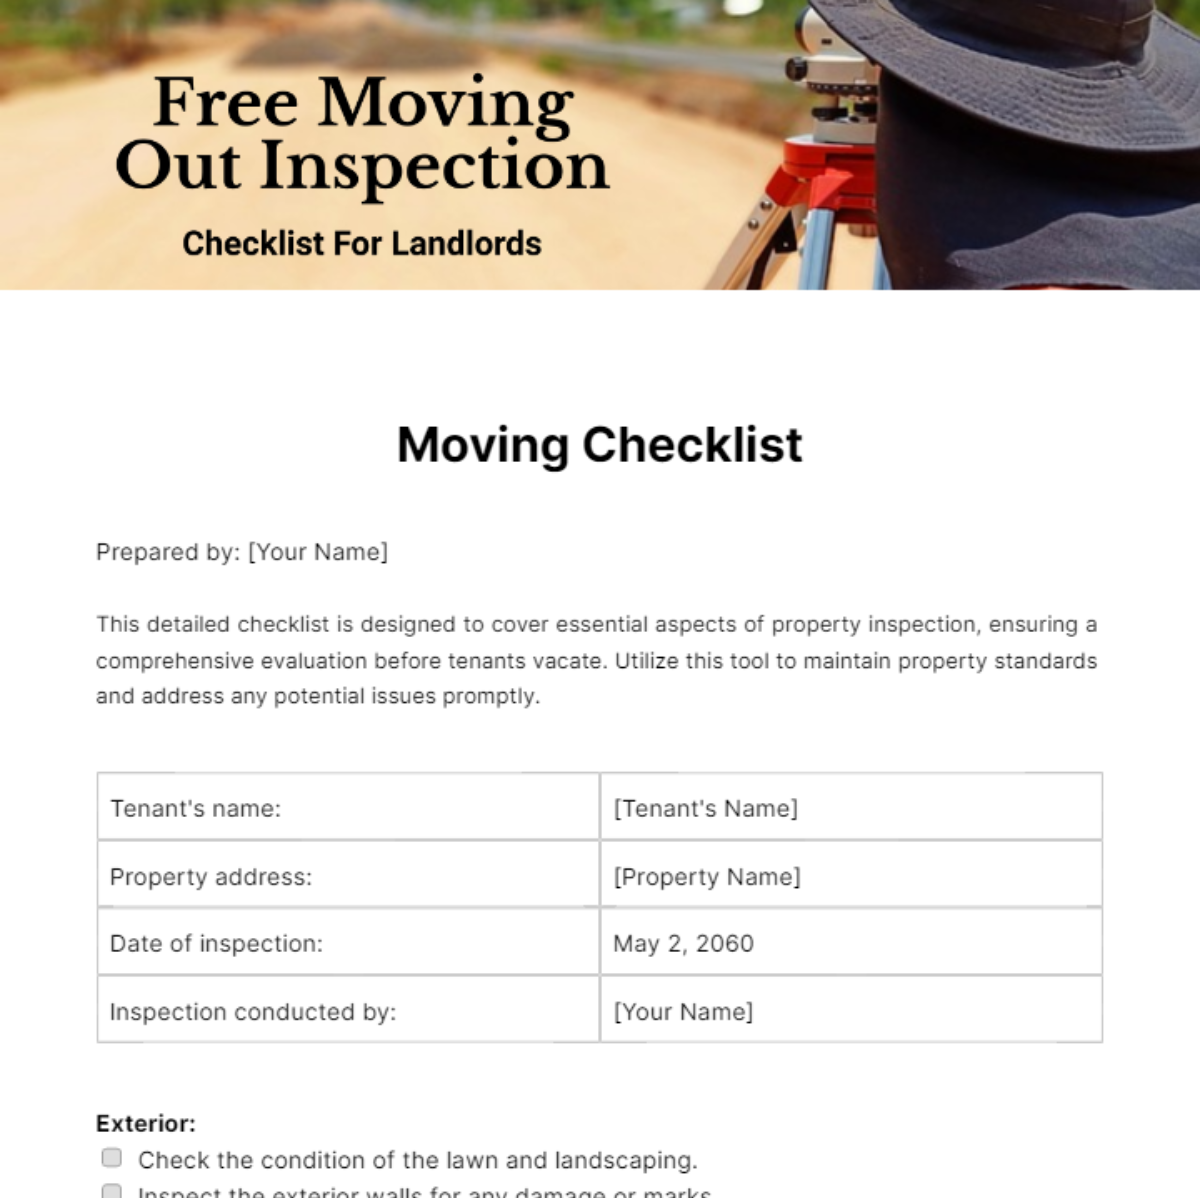 Moving Out Inspection Checklist For Landlords Template